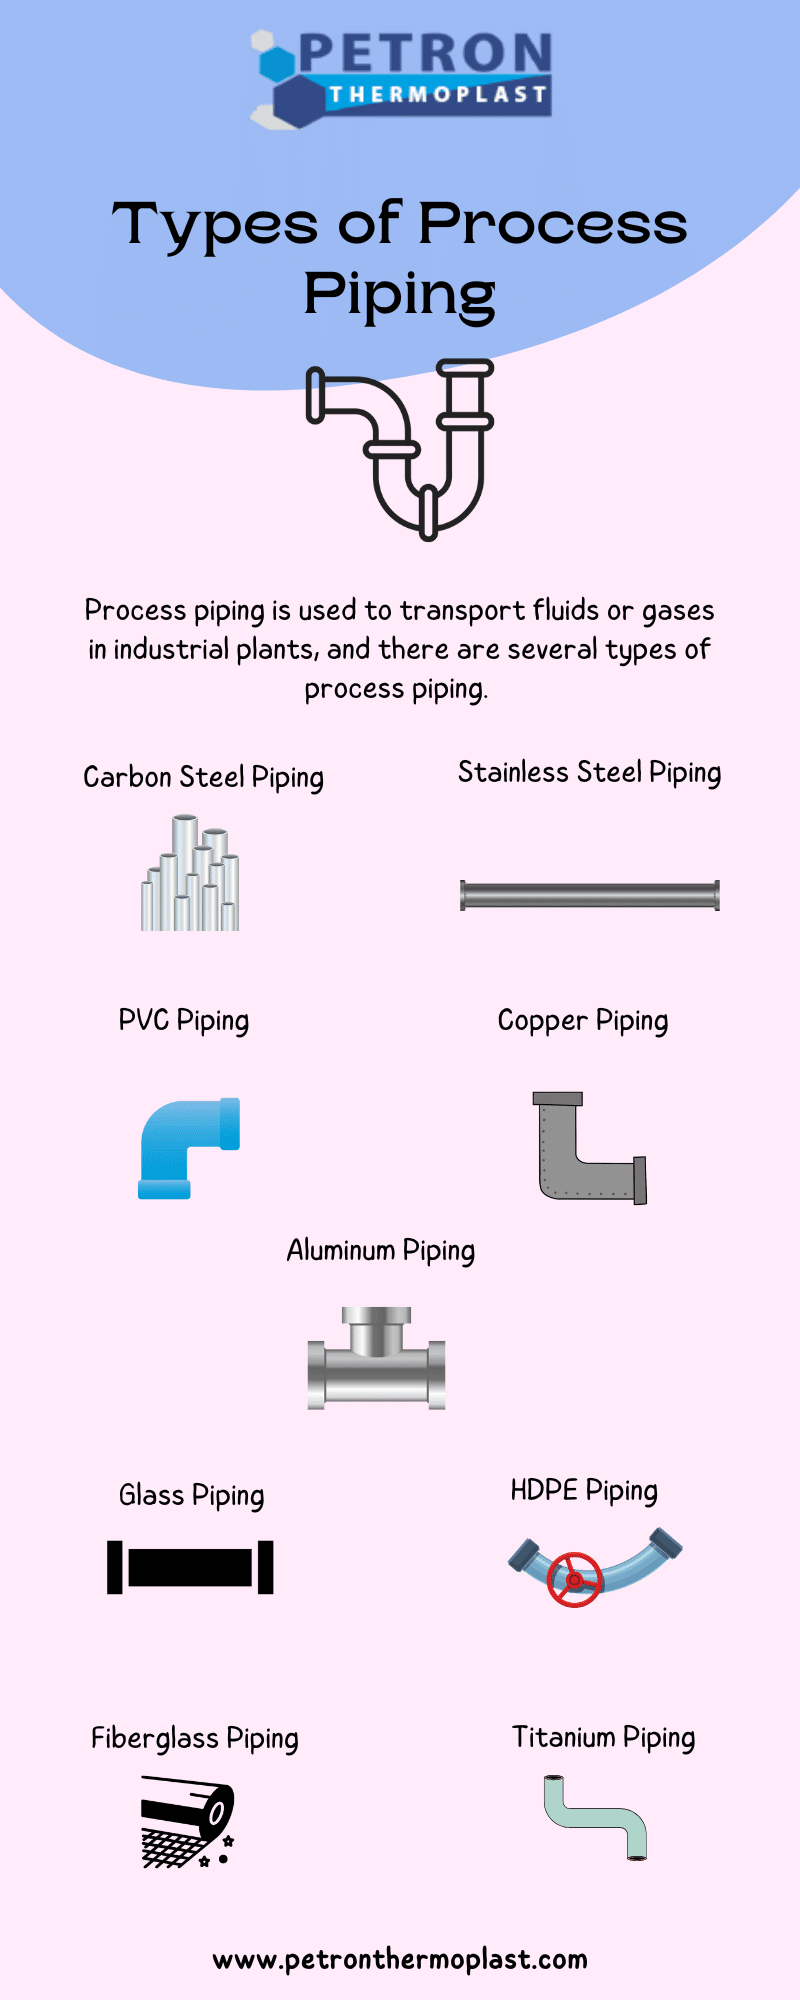 Types of Process Piping